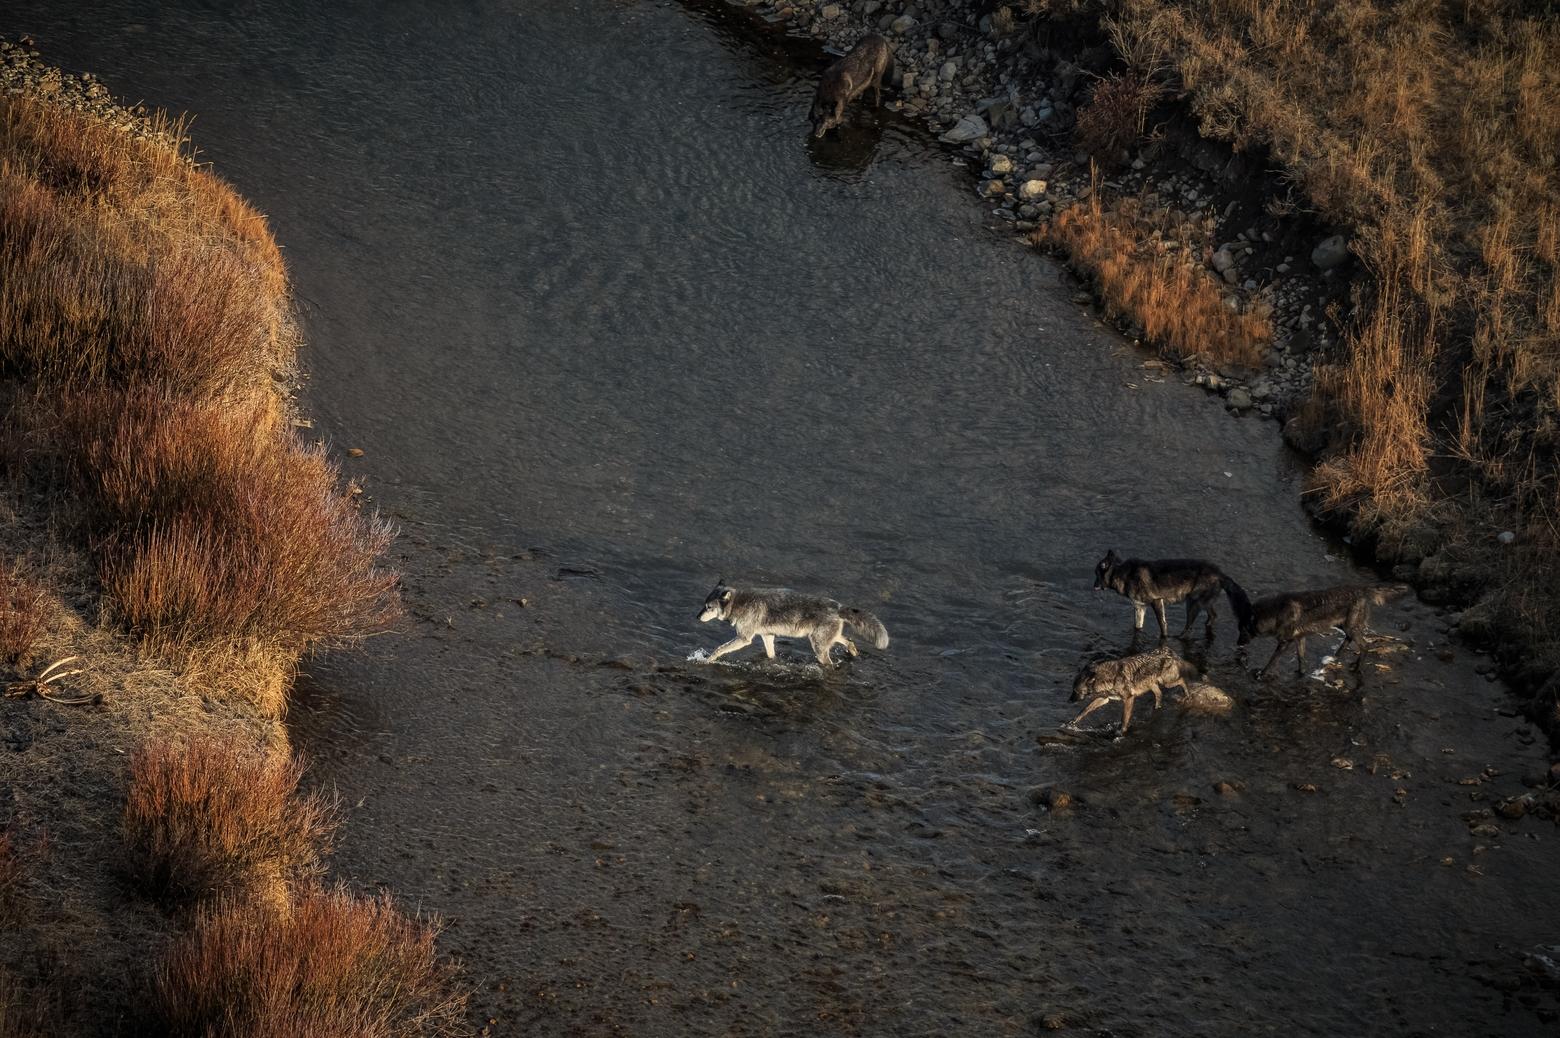 An aerial photograph of the 8-Mile Wolf Pack crossing the Gardner River in Yellowstone National Park. The collared gray wolf in front, known to the scientists as 689M, was previously the alpha male of the neighboring Cougar Creek Pack. Scientists suspect the Cougar Creek Pack killed the alpha male of the 8-Mile Pack, 871M. 689M was shot by a hunter outside of the park one week after this photo was taken on November 5, 2014.Photo by Ronan Donovan